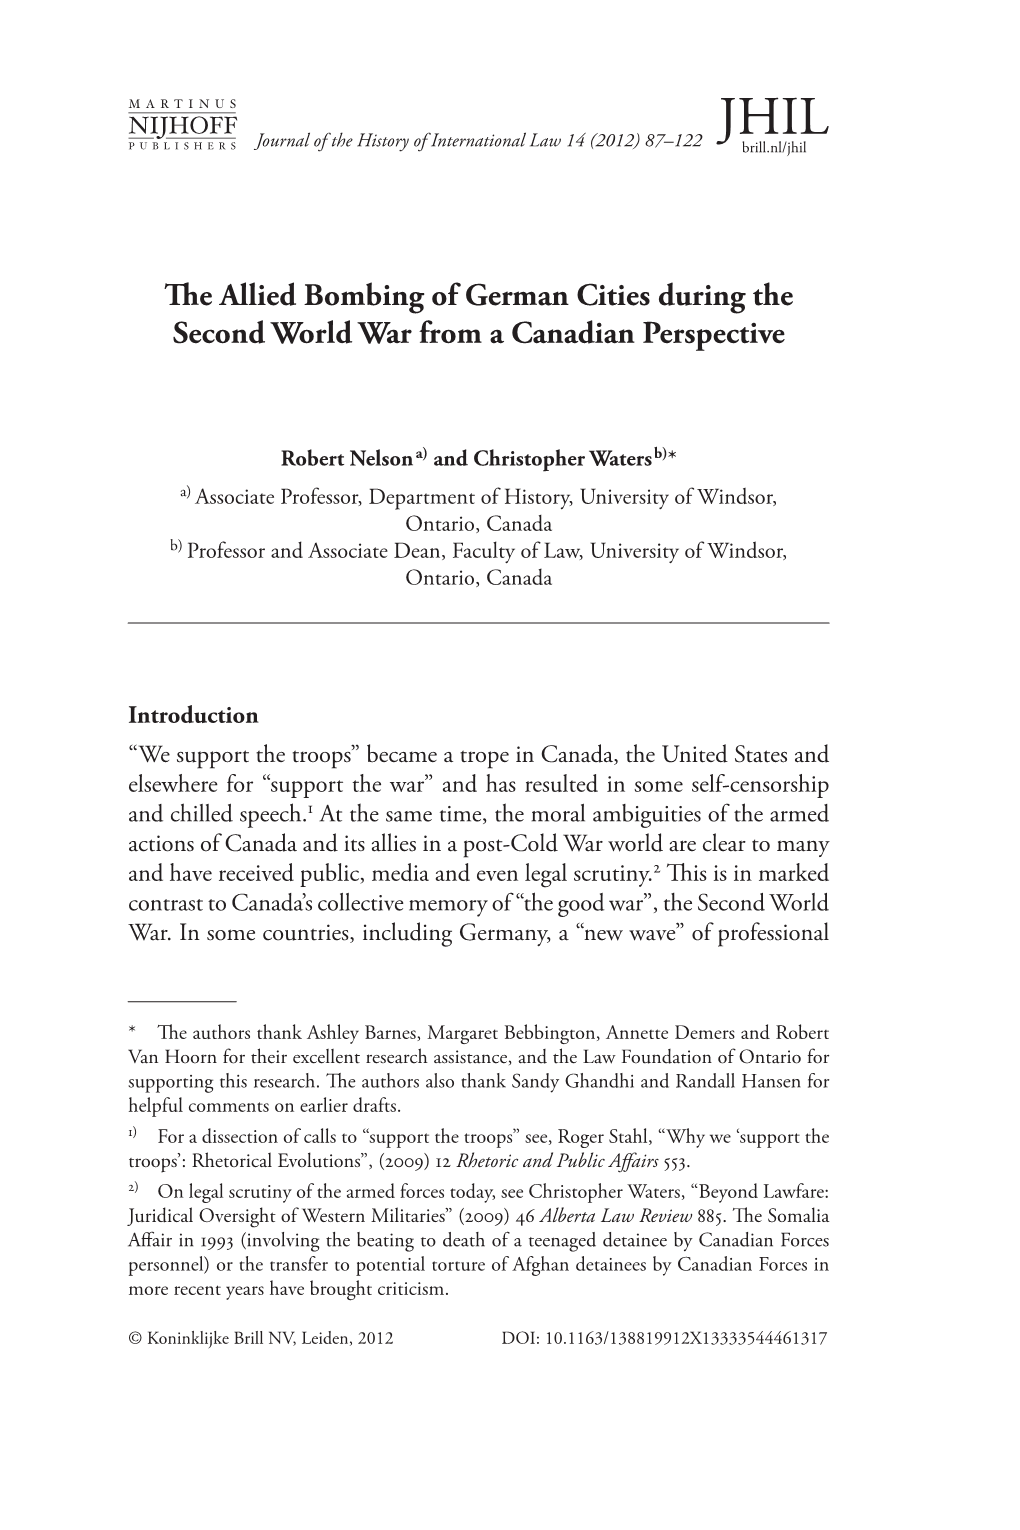 The Allied Bombing of German Cities During the Second World War from a Canadian Perspective